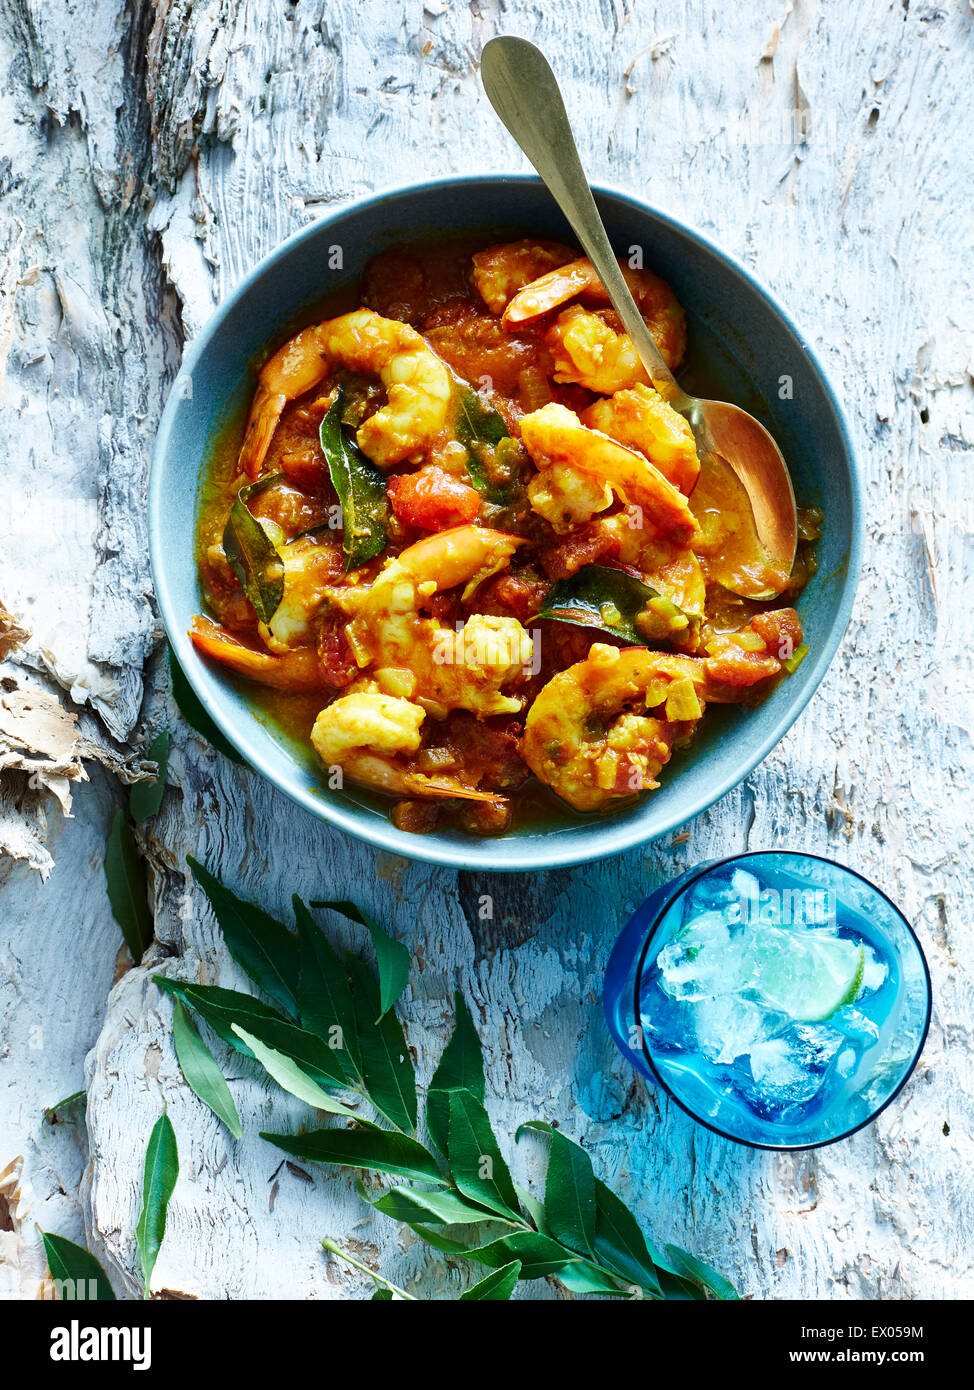 Still life with bowl of Mauritian Creole king prawn curry Stock Photo